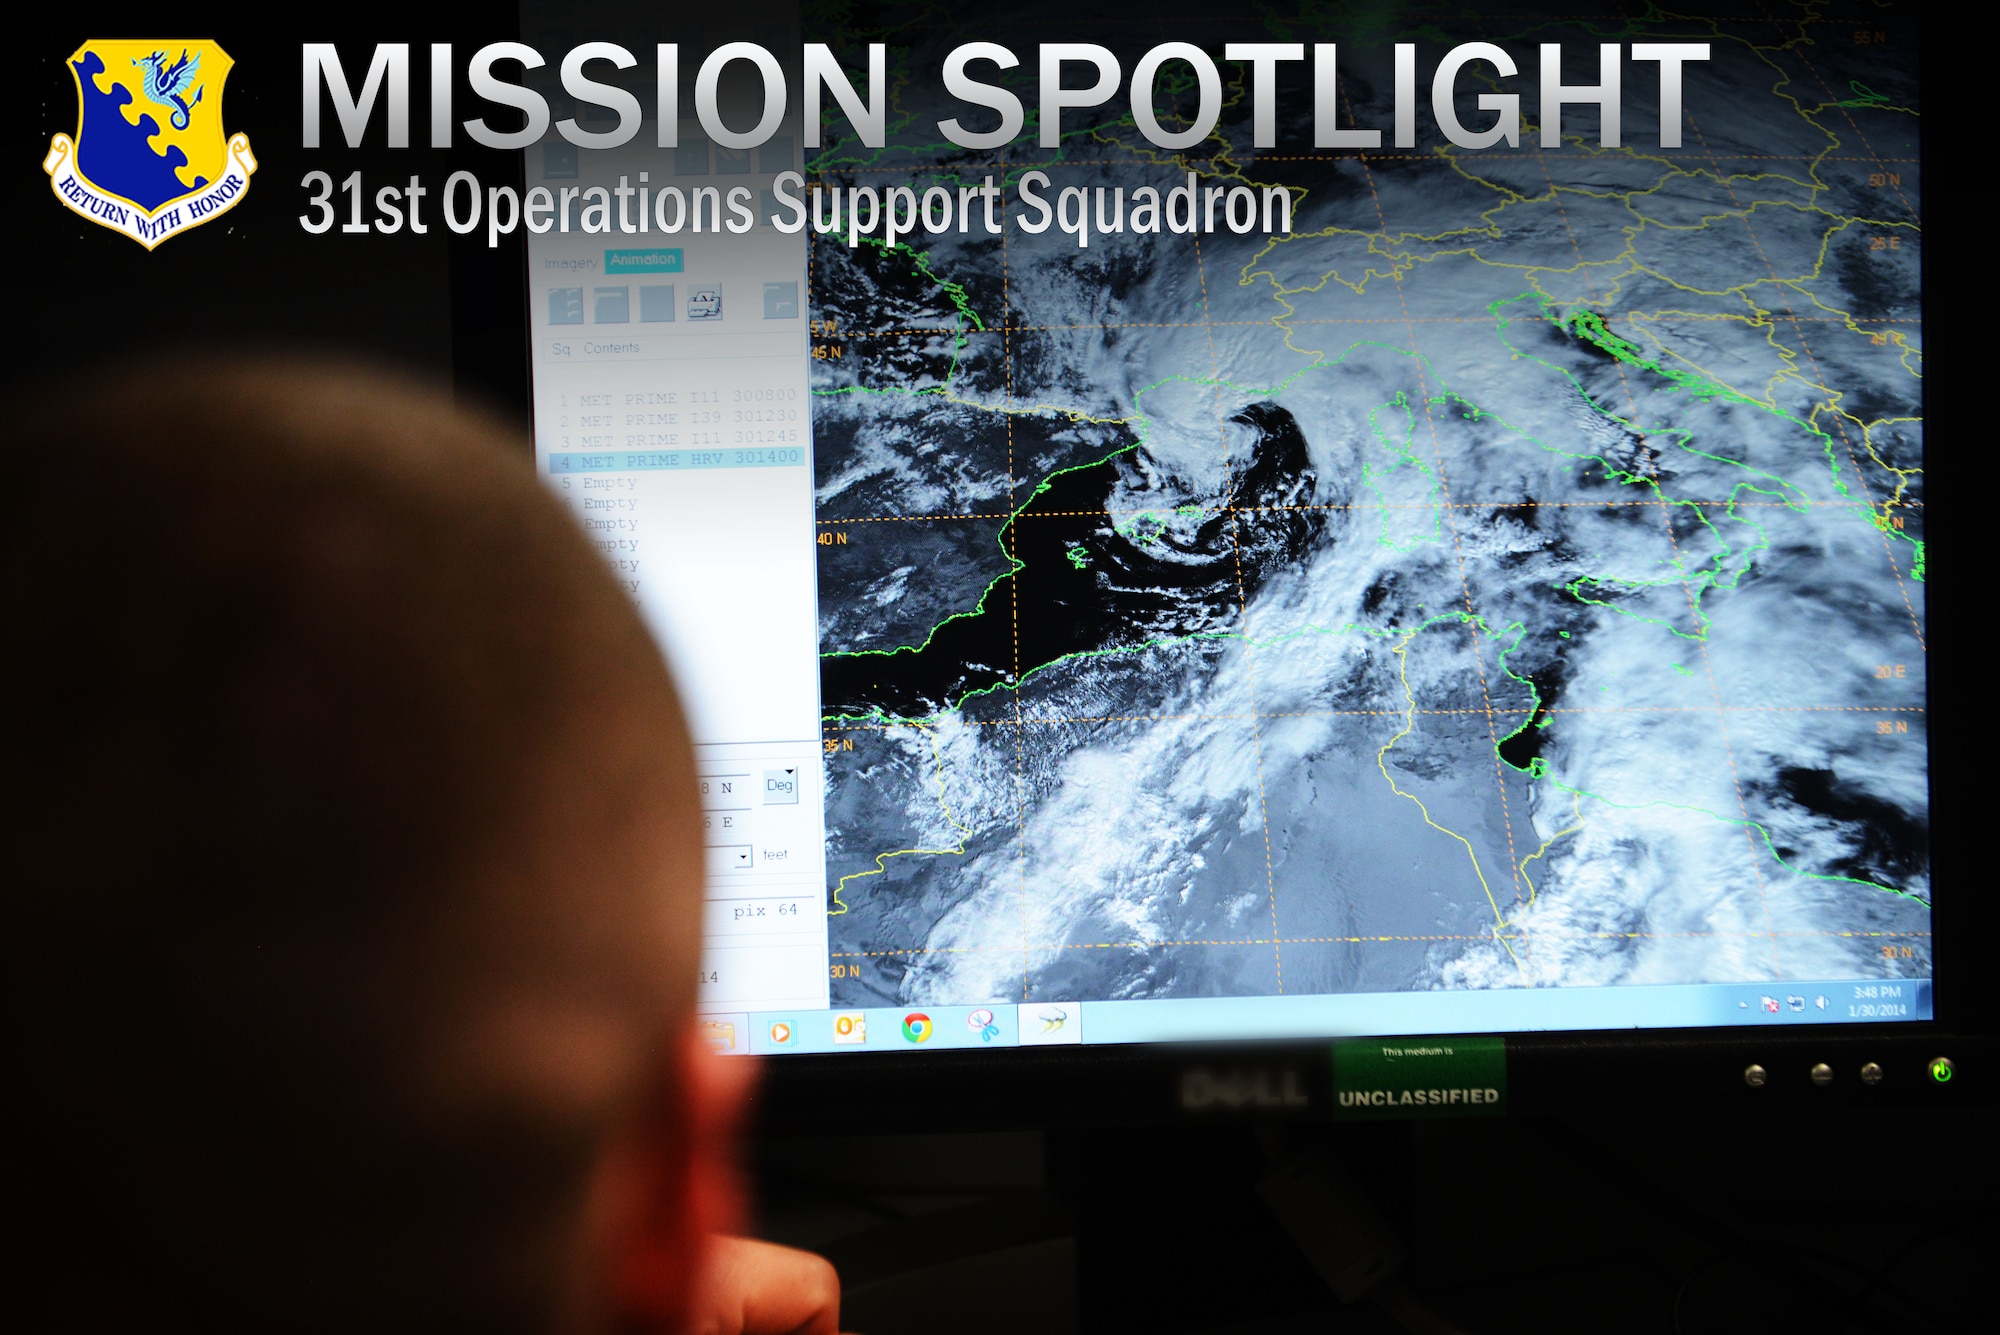 First Lieutenant David DeMeuse, 31st Operations Support Squadron Weather Flight commander, observes cloud patterns over Italy using real-time satellite imagery, Jan. 30, 2014, at Aviano Air Base, Italy. The weather flight employs the "eyes forward" approach using real-time radar, satellite imagery, sensor readouts and visual observations to tailor weather conditions specifically for the 31st Fighter Wing. (U.S. Air Force photo/Airman 1st Class Ryan Conroy) 